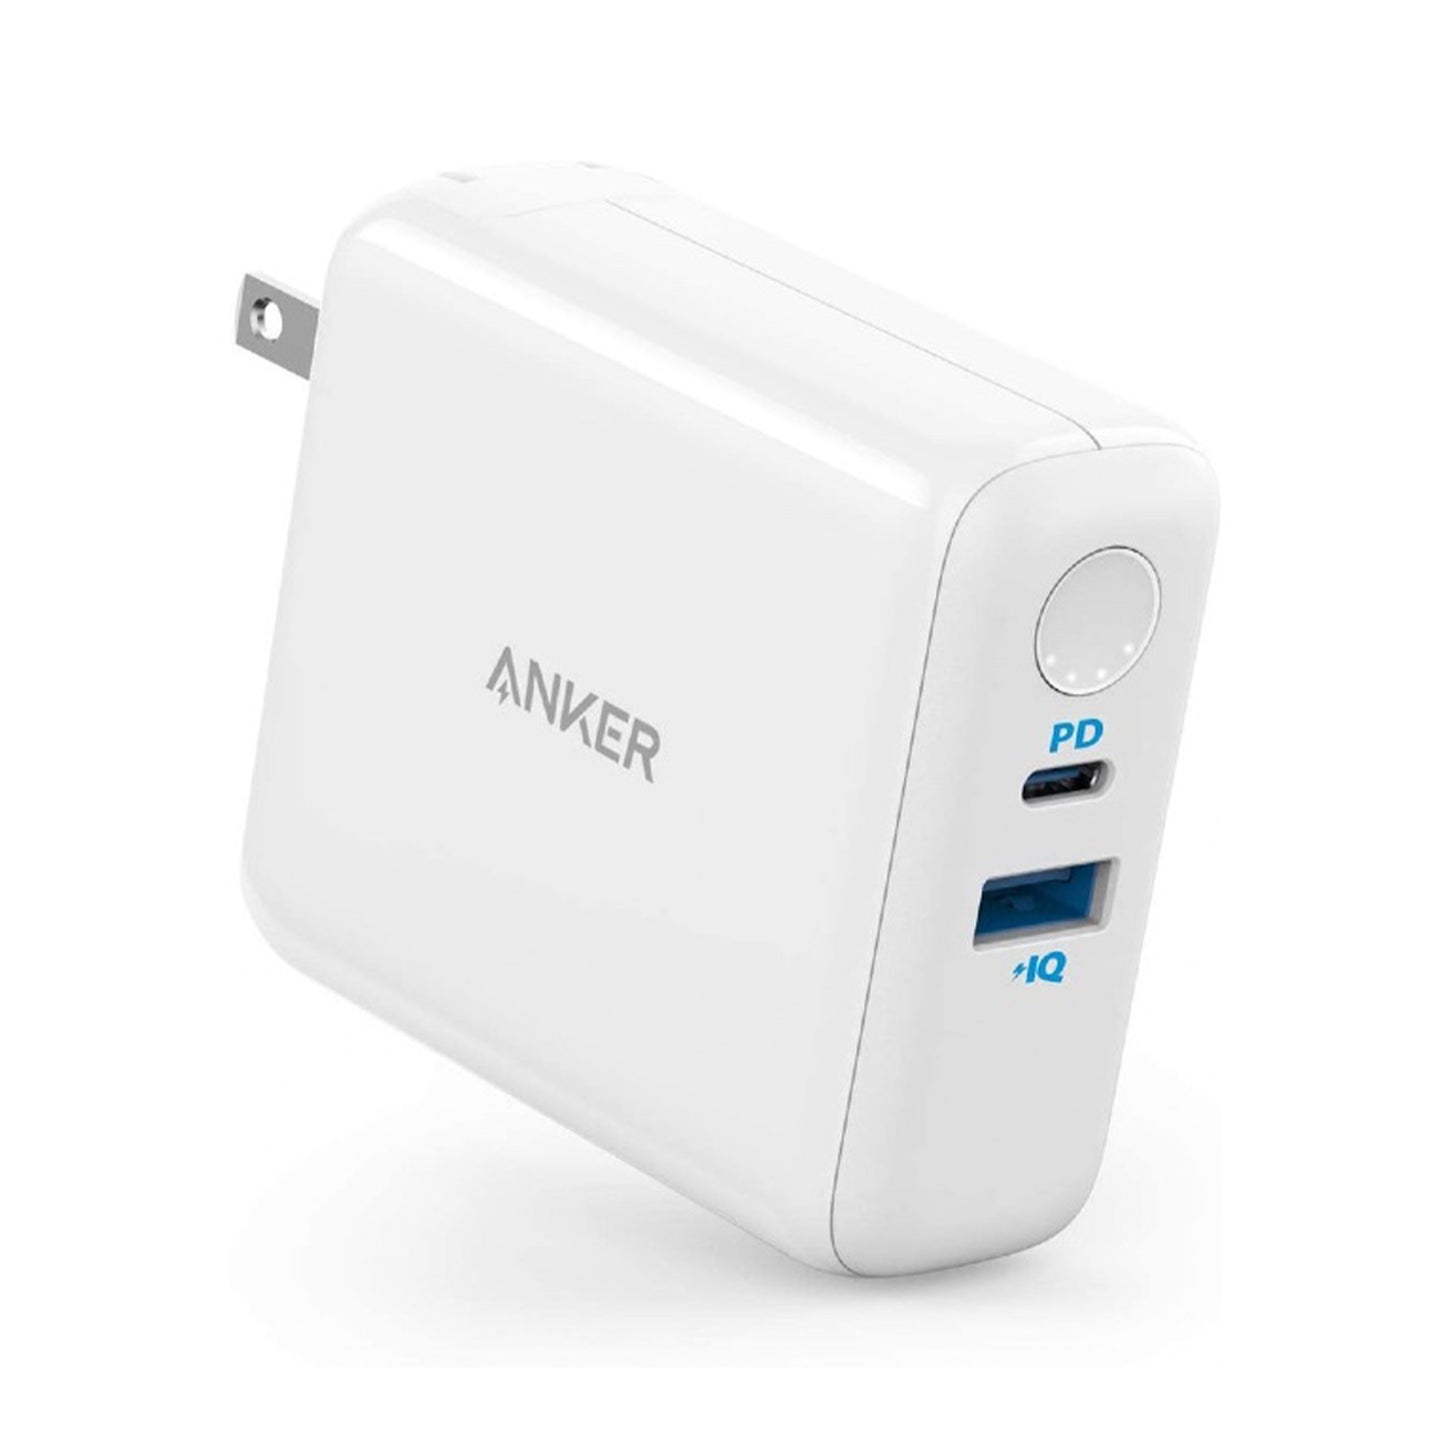 ANKER PowerCore III Fusion PD 5000mAh Power Bank and Wall Charger - White